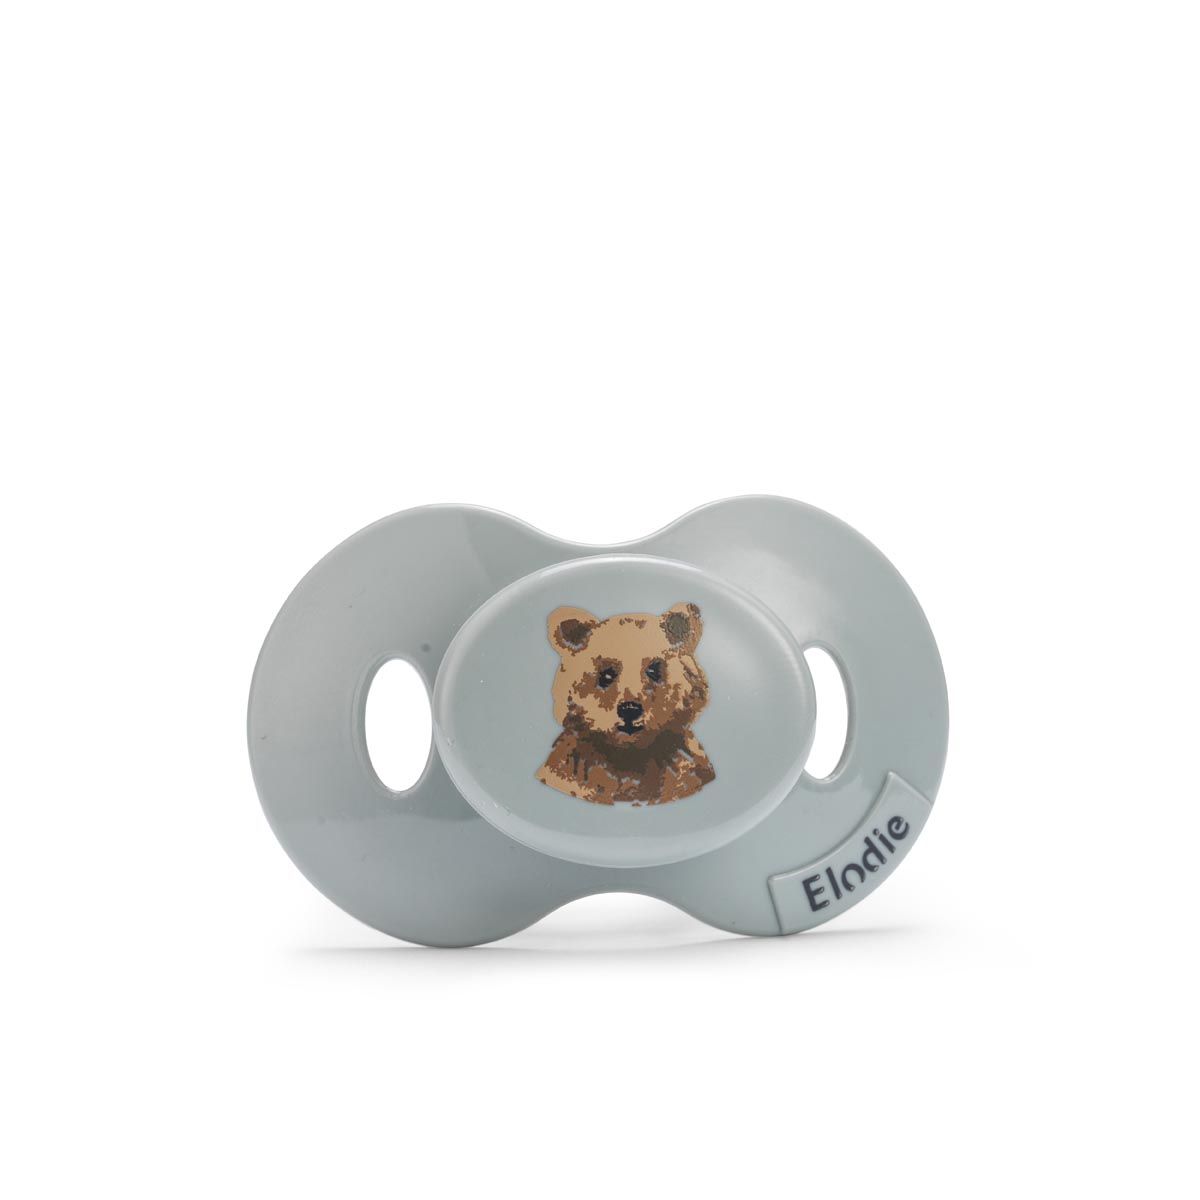 30100153858na-pacifier-billy-the-bear-front-aw22-pp